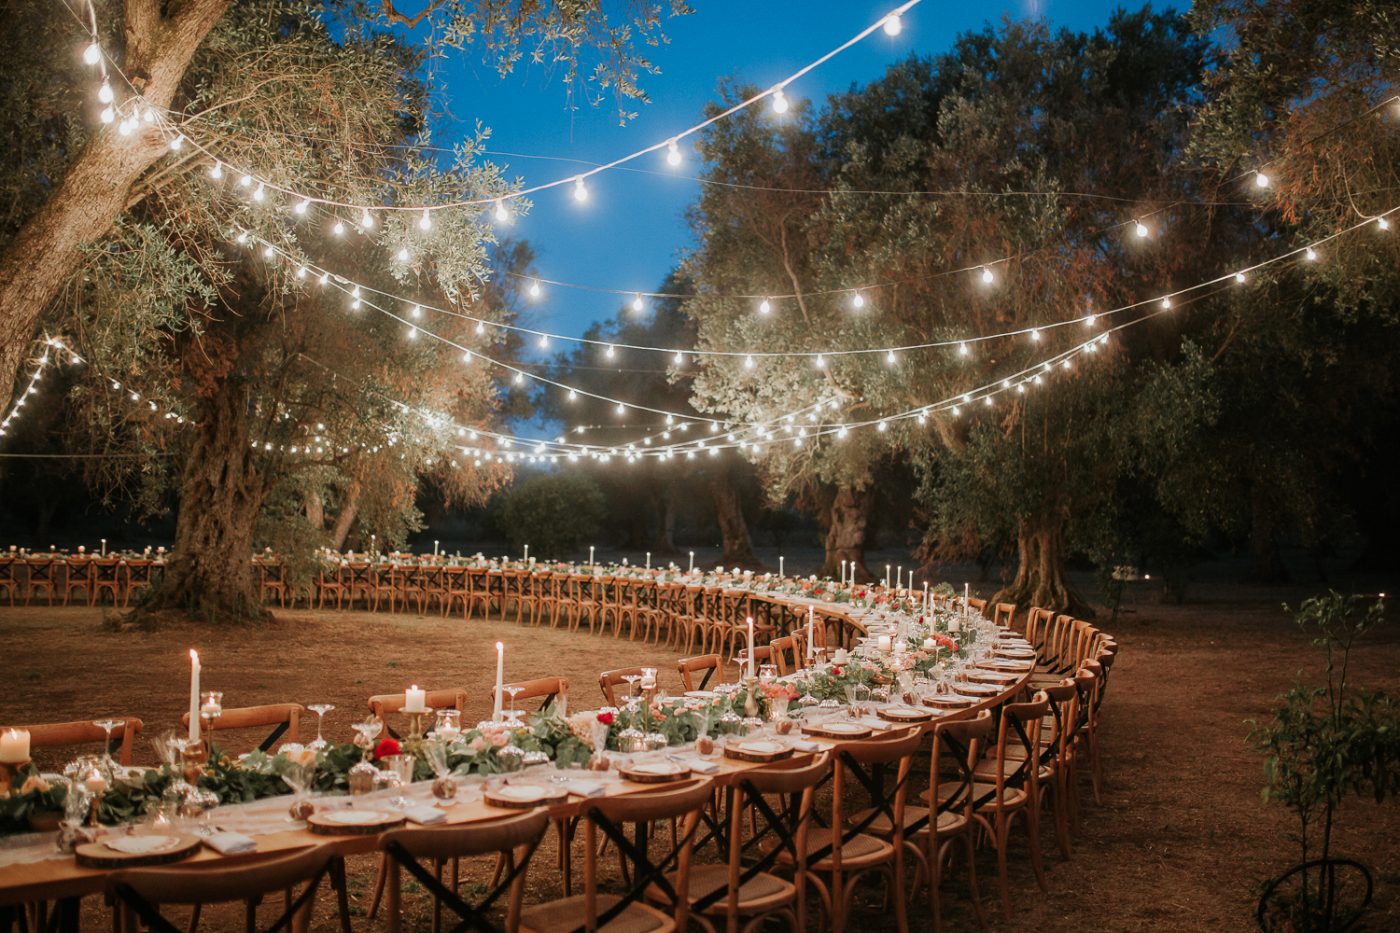 Magical Forest Wedding Venues You’ll Want to Get Lost In